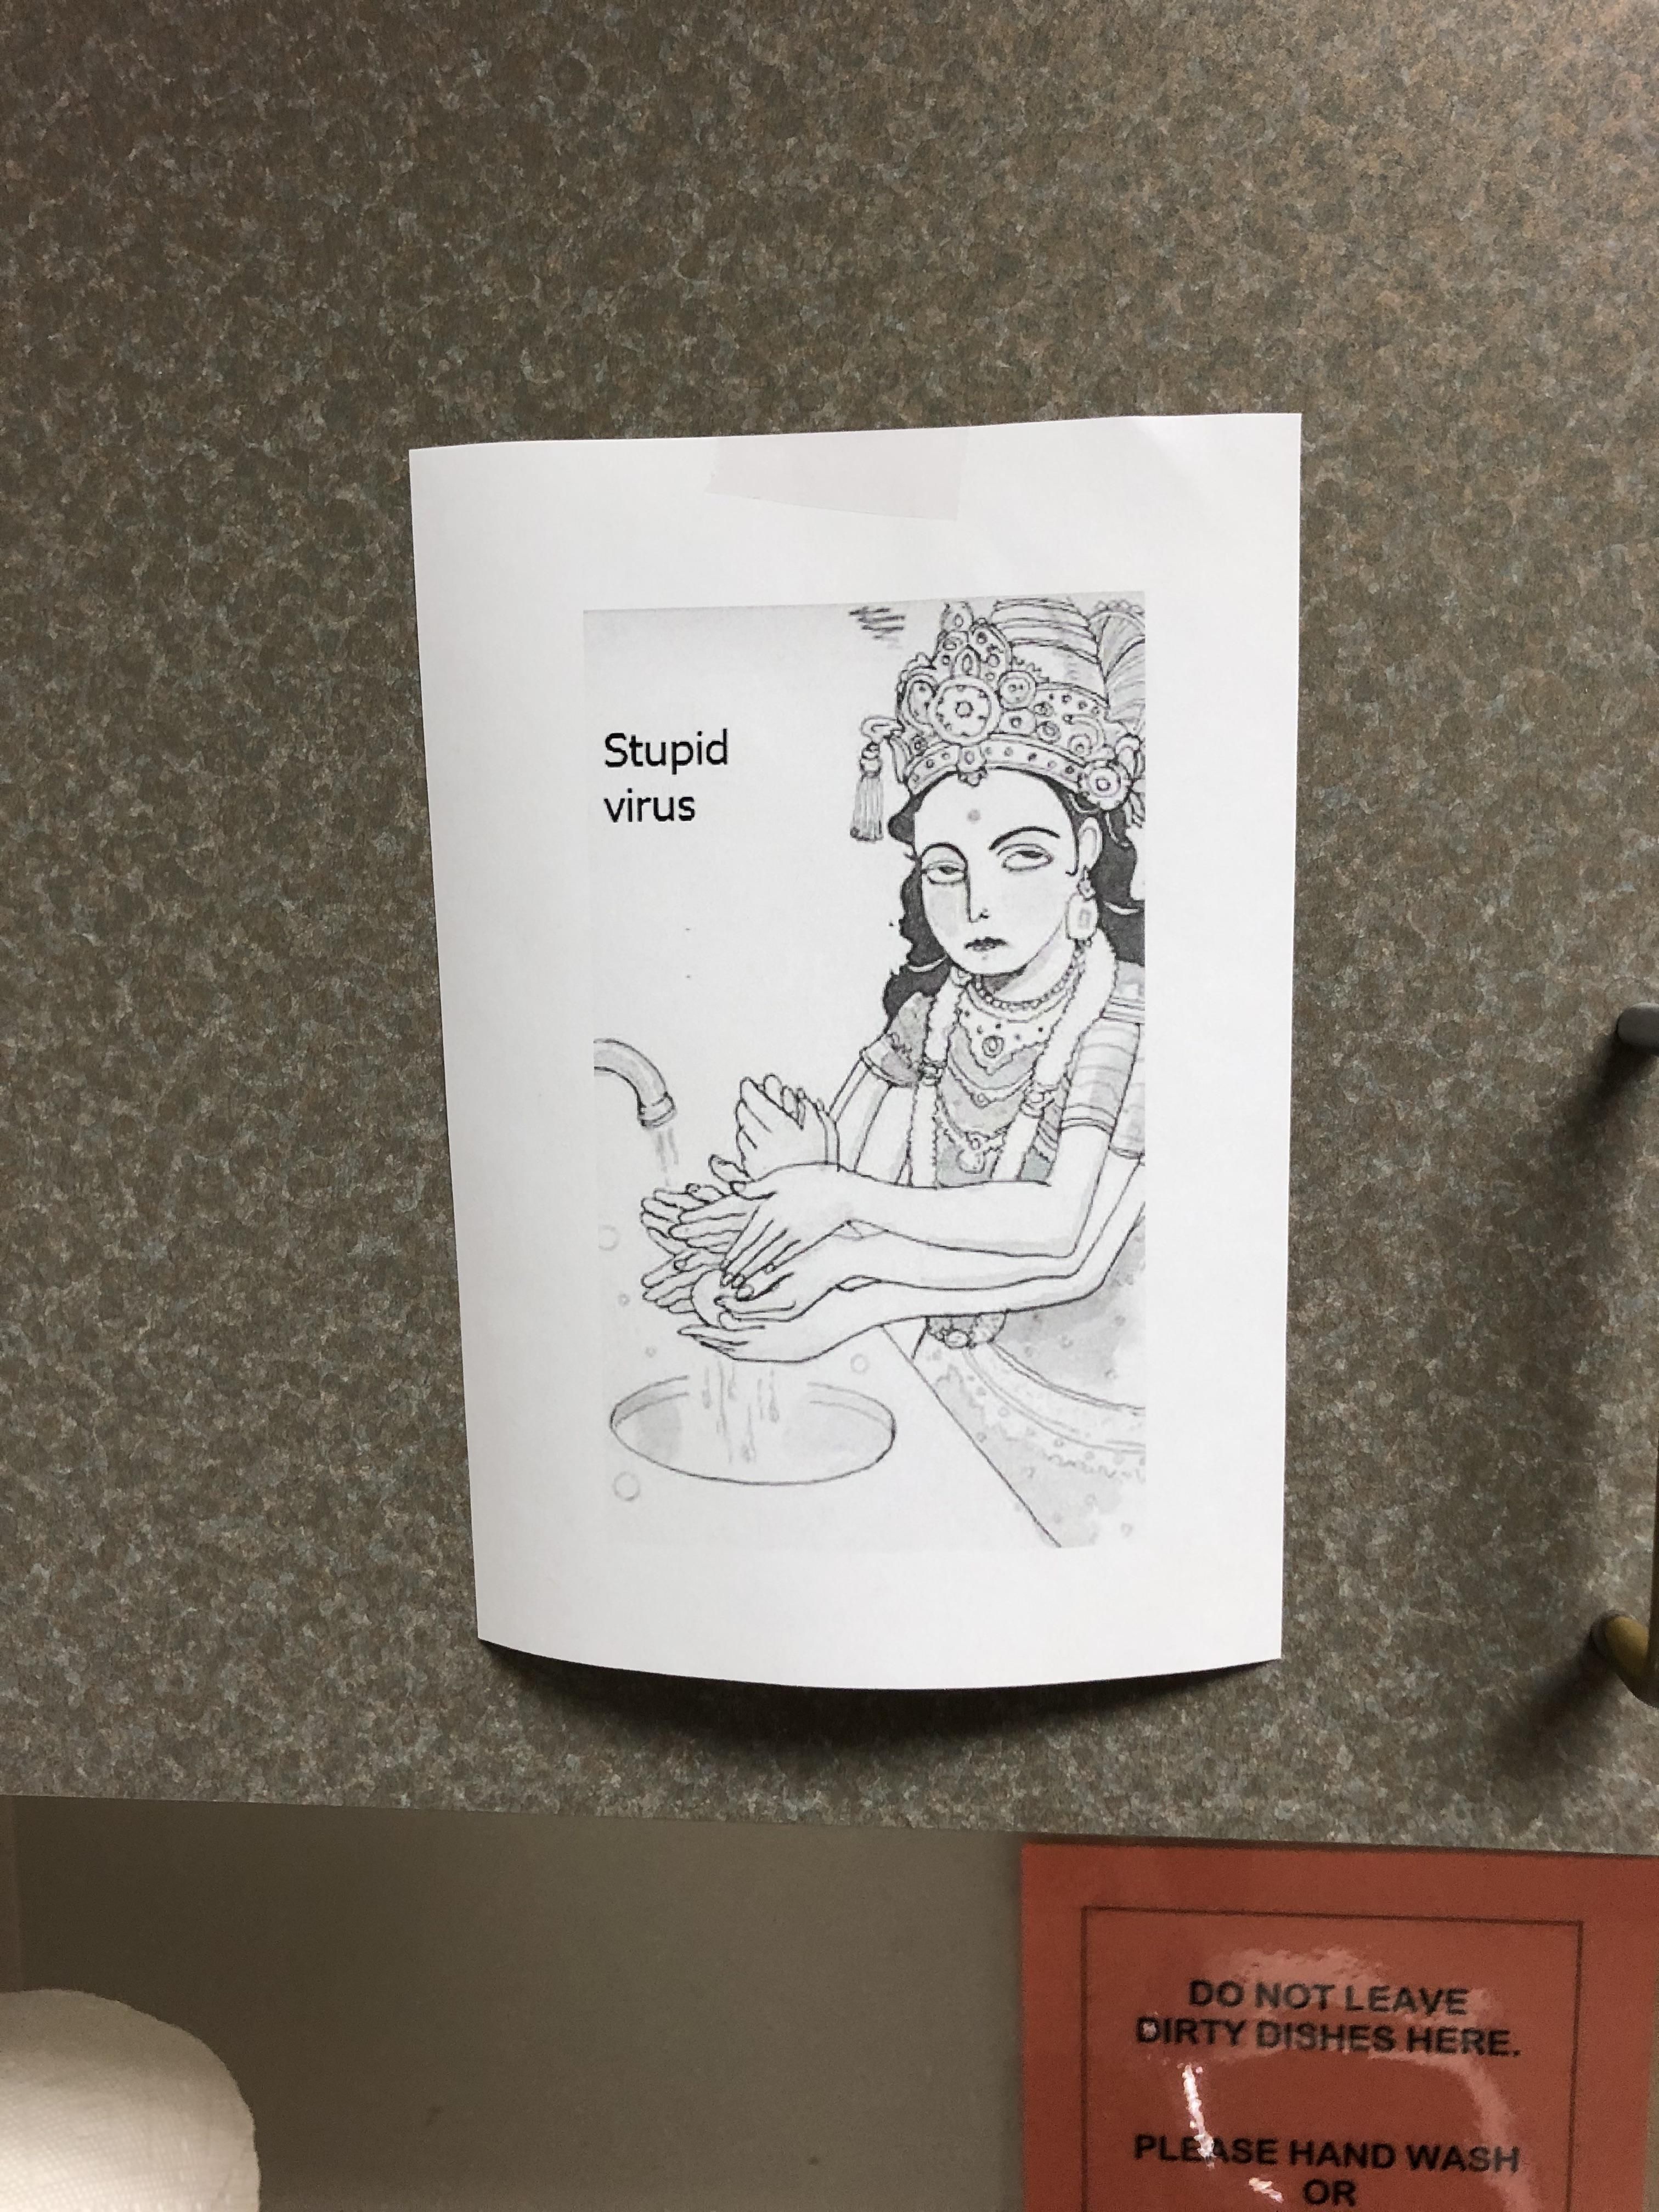 Someone posted this by the sink at work